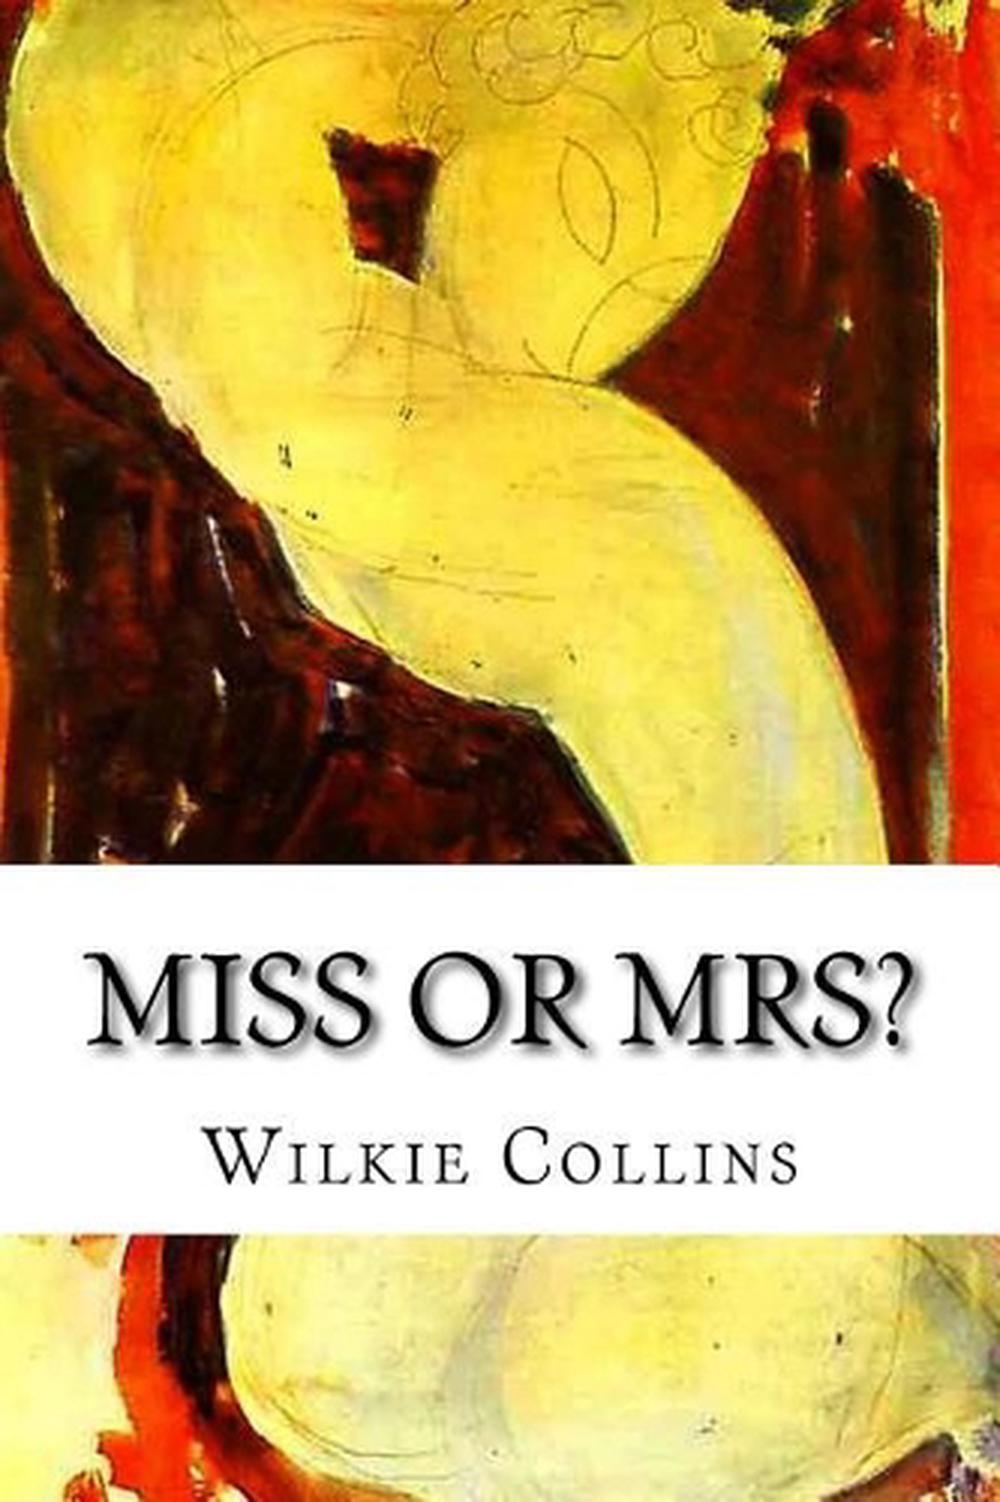 Miss or Mrs? by Wilkie Collins (English) Paperback Book Free Shipping! - Wilkie Collins